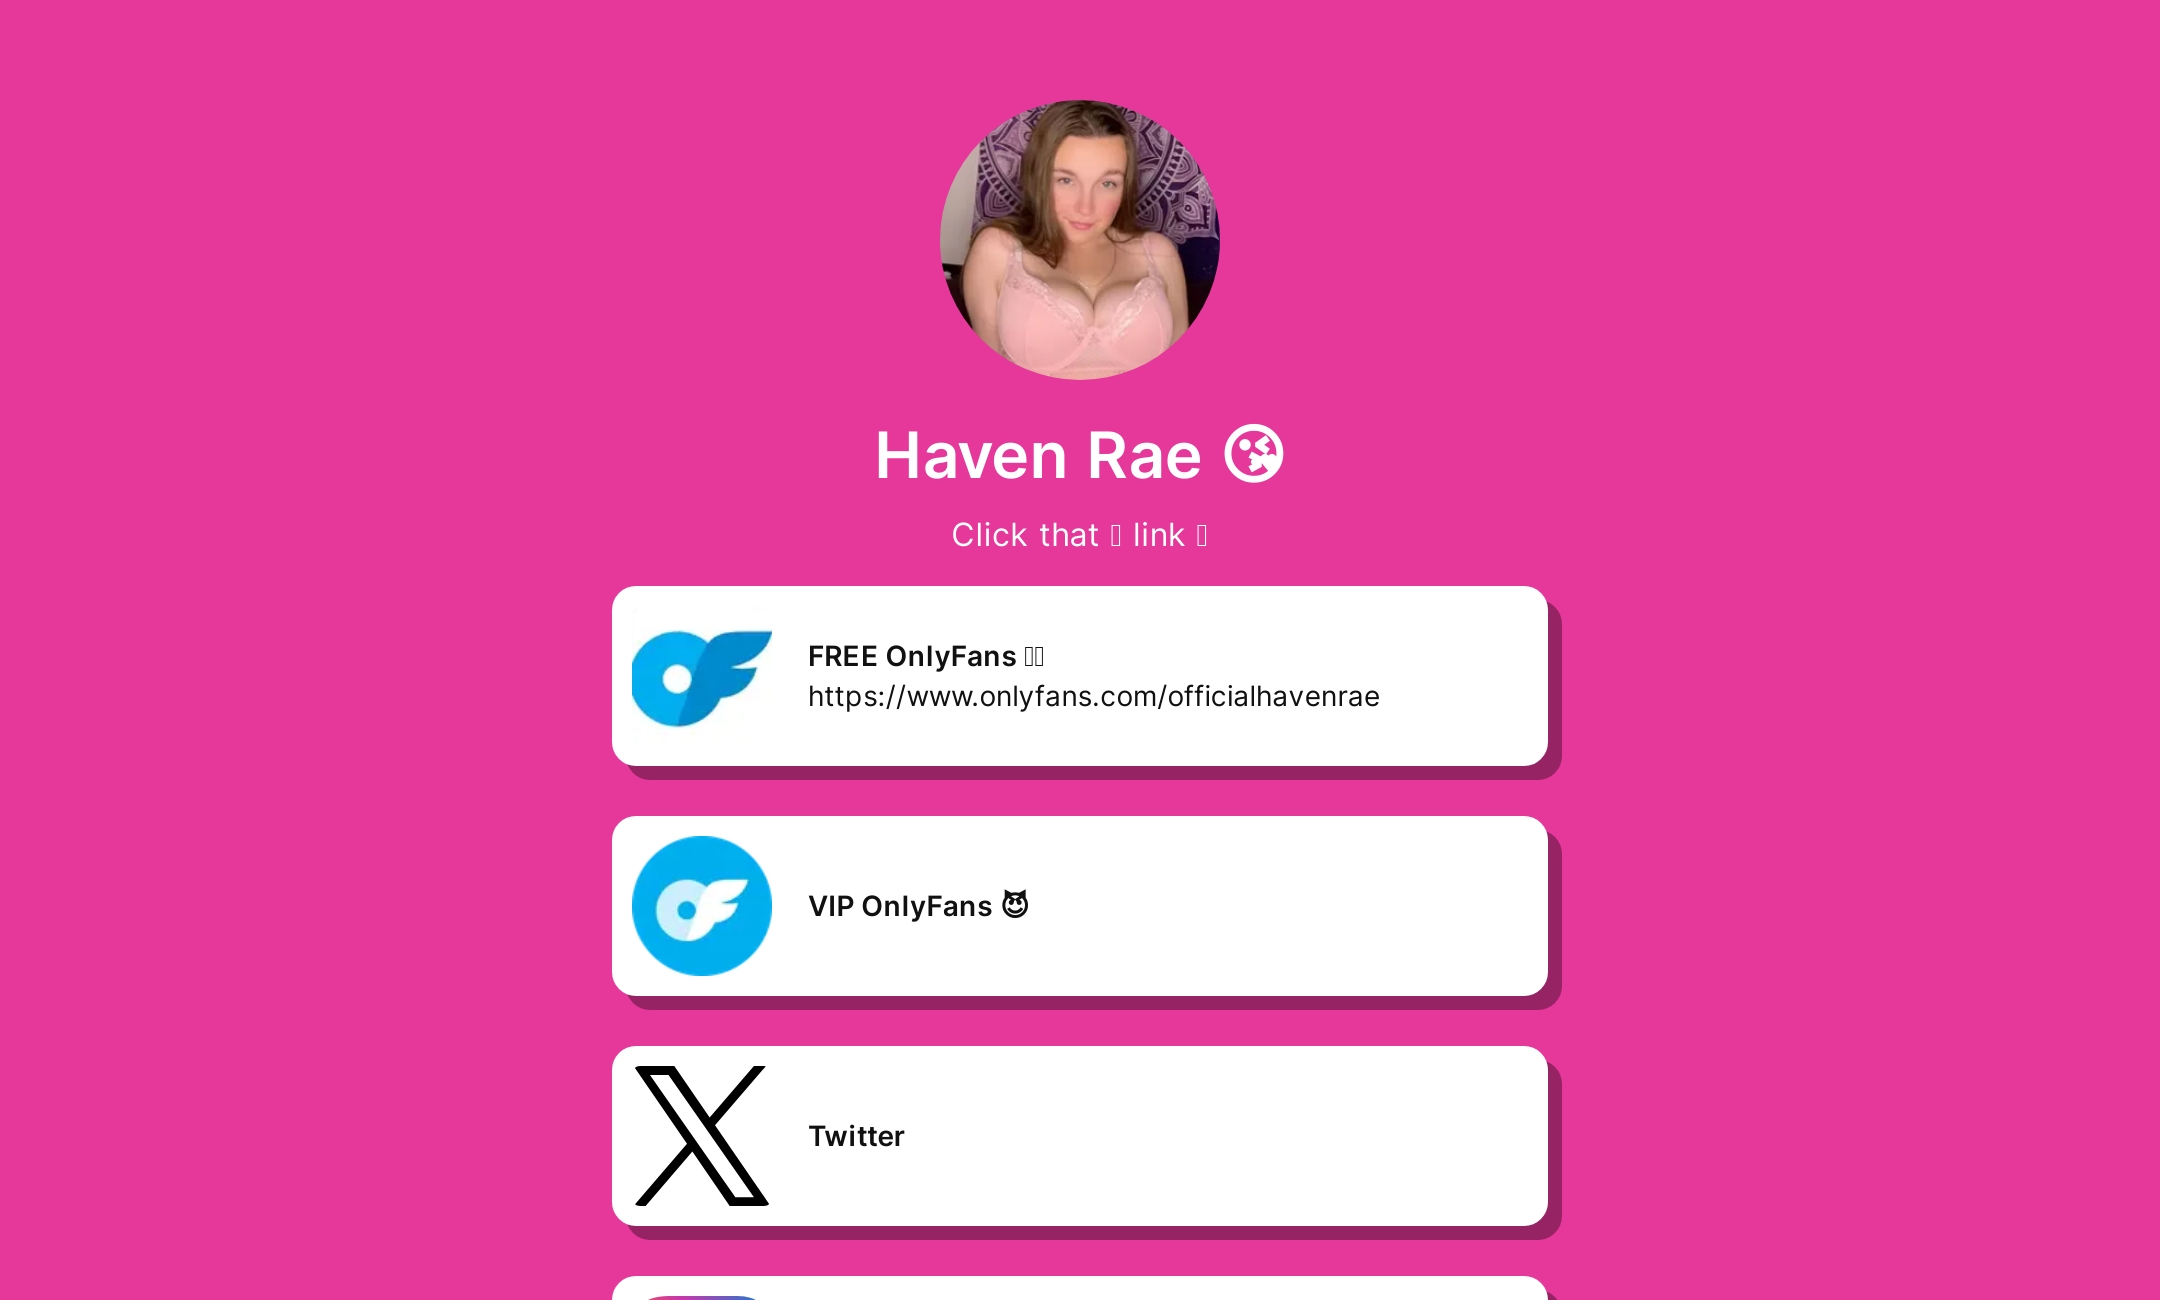 Haven Rae 😘 S Flowpage